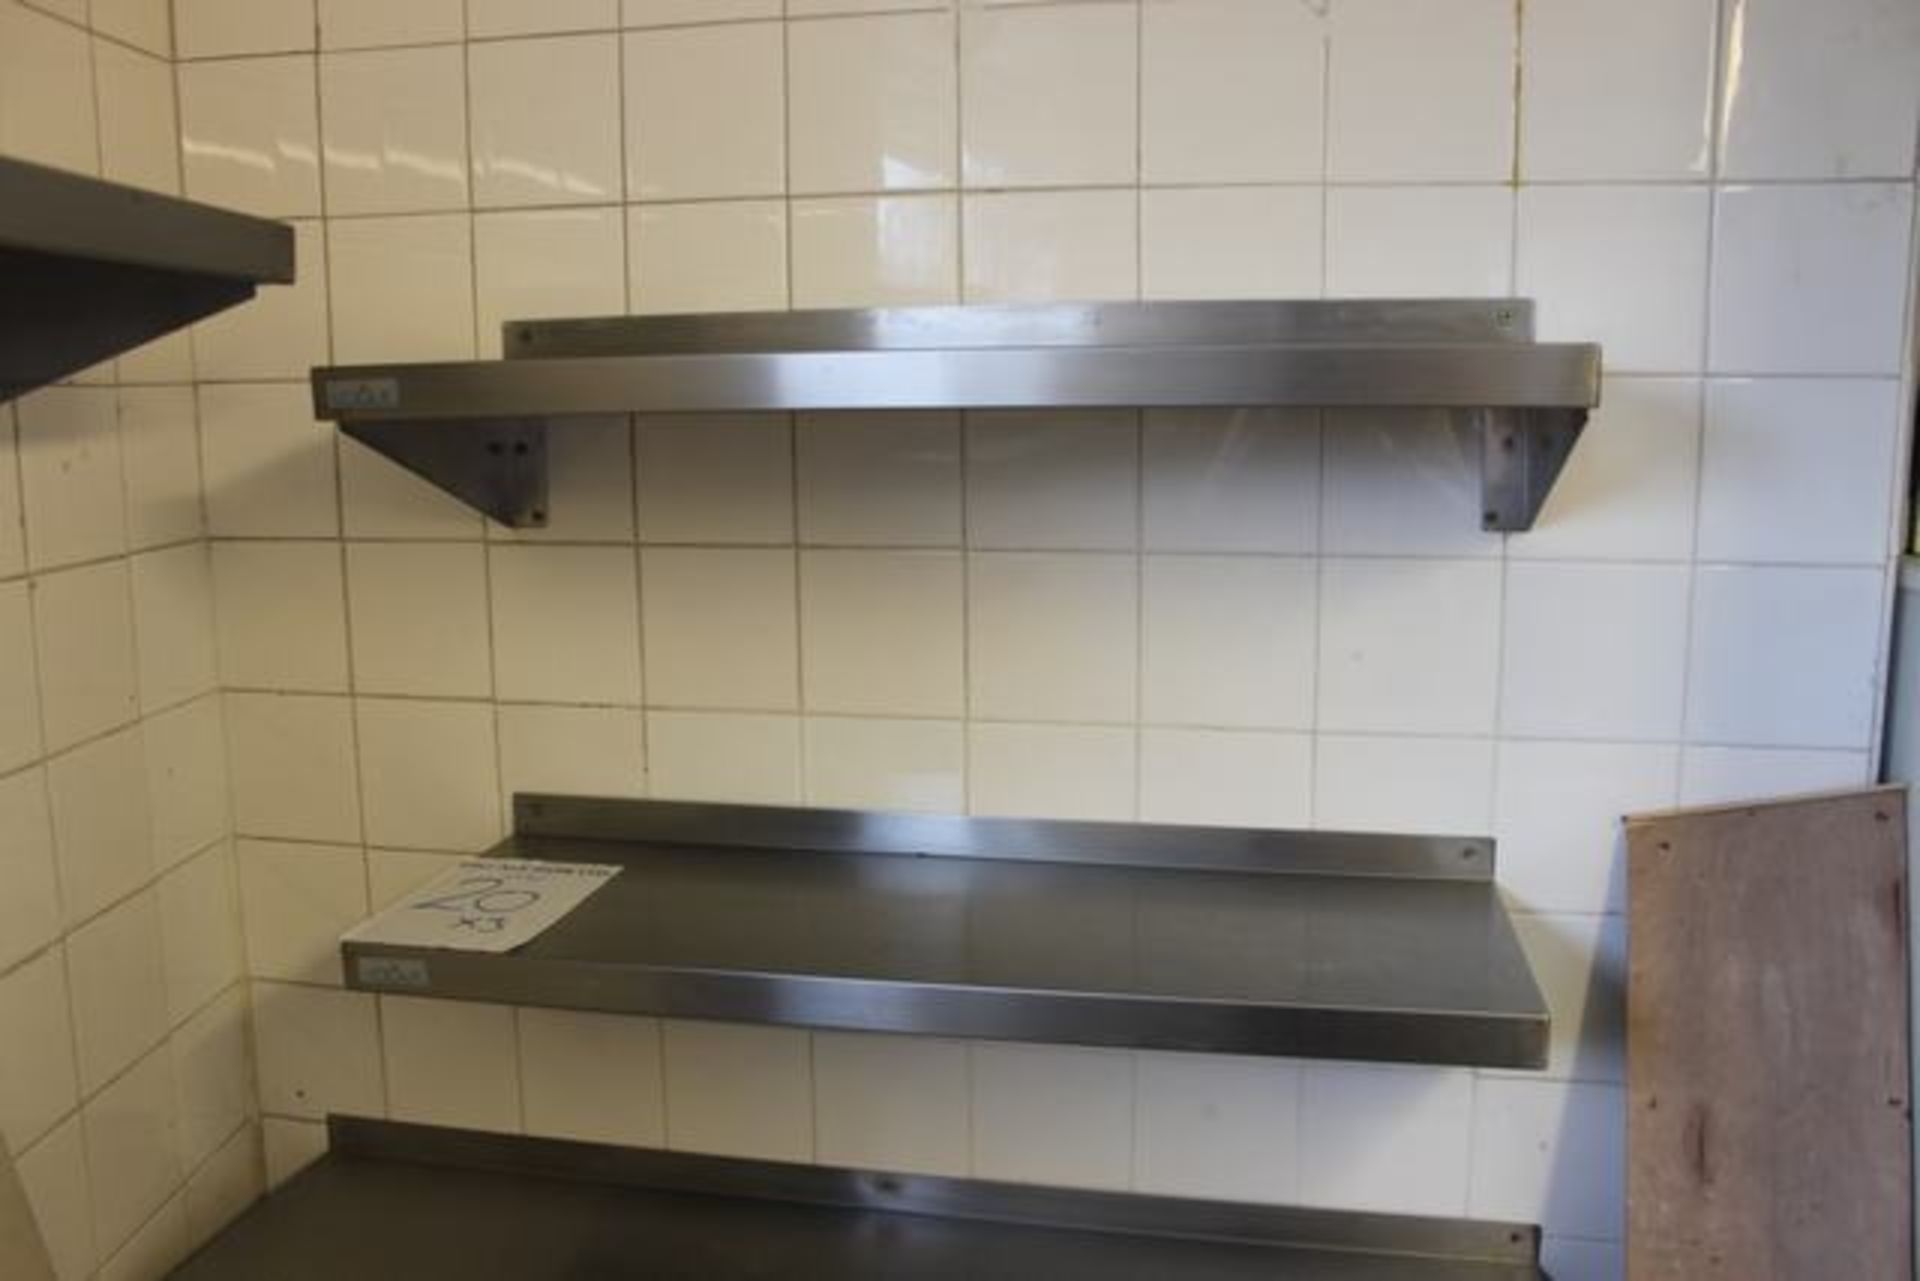 3 x Vogue stainless steel shelves 900mm x 300mm